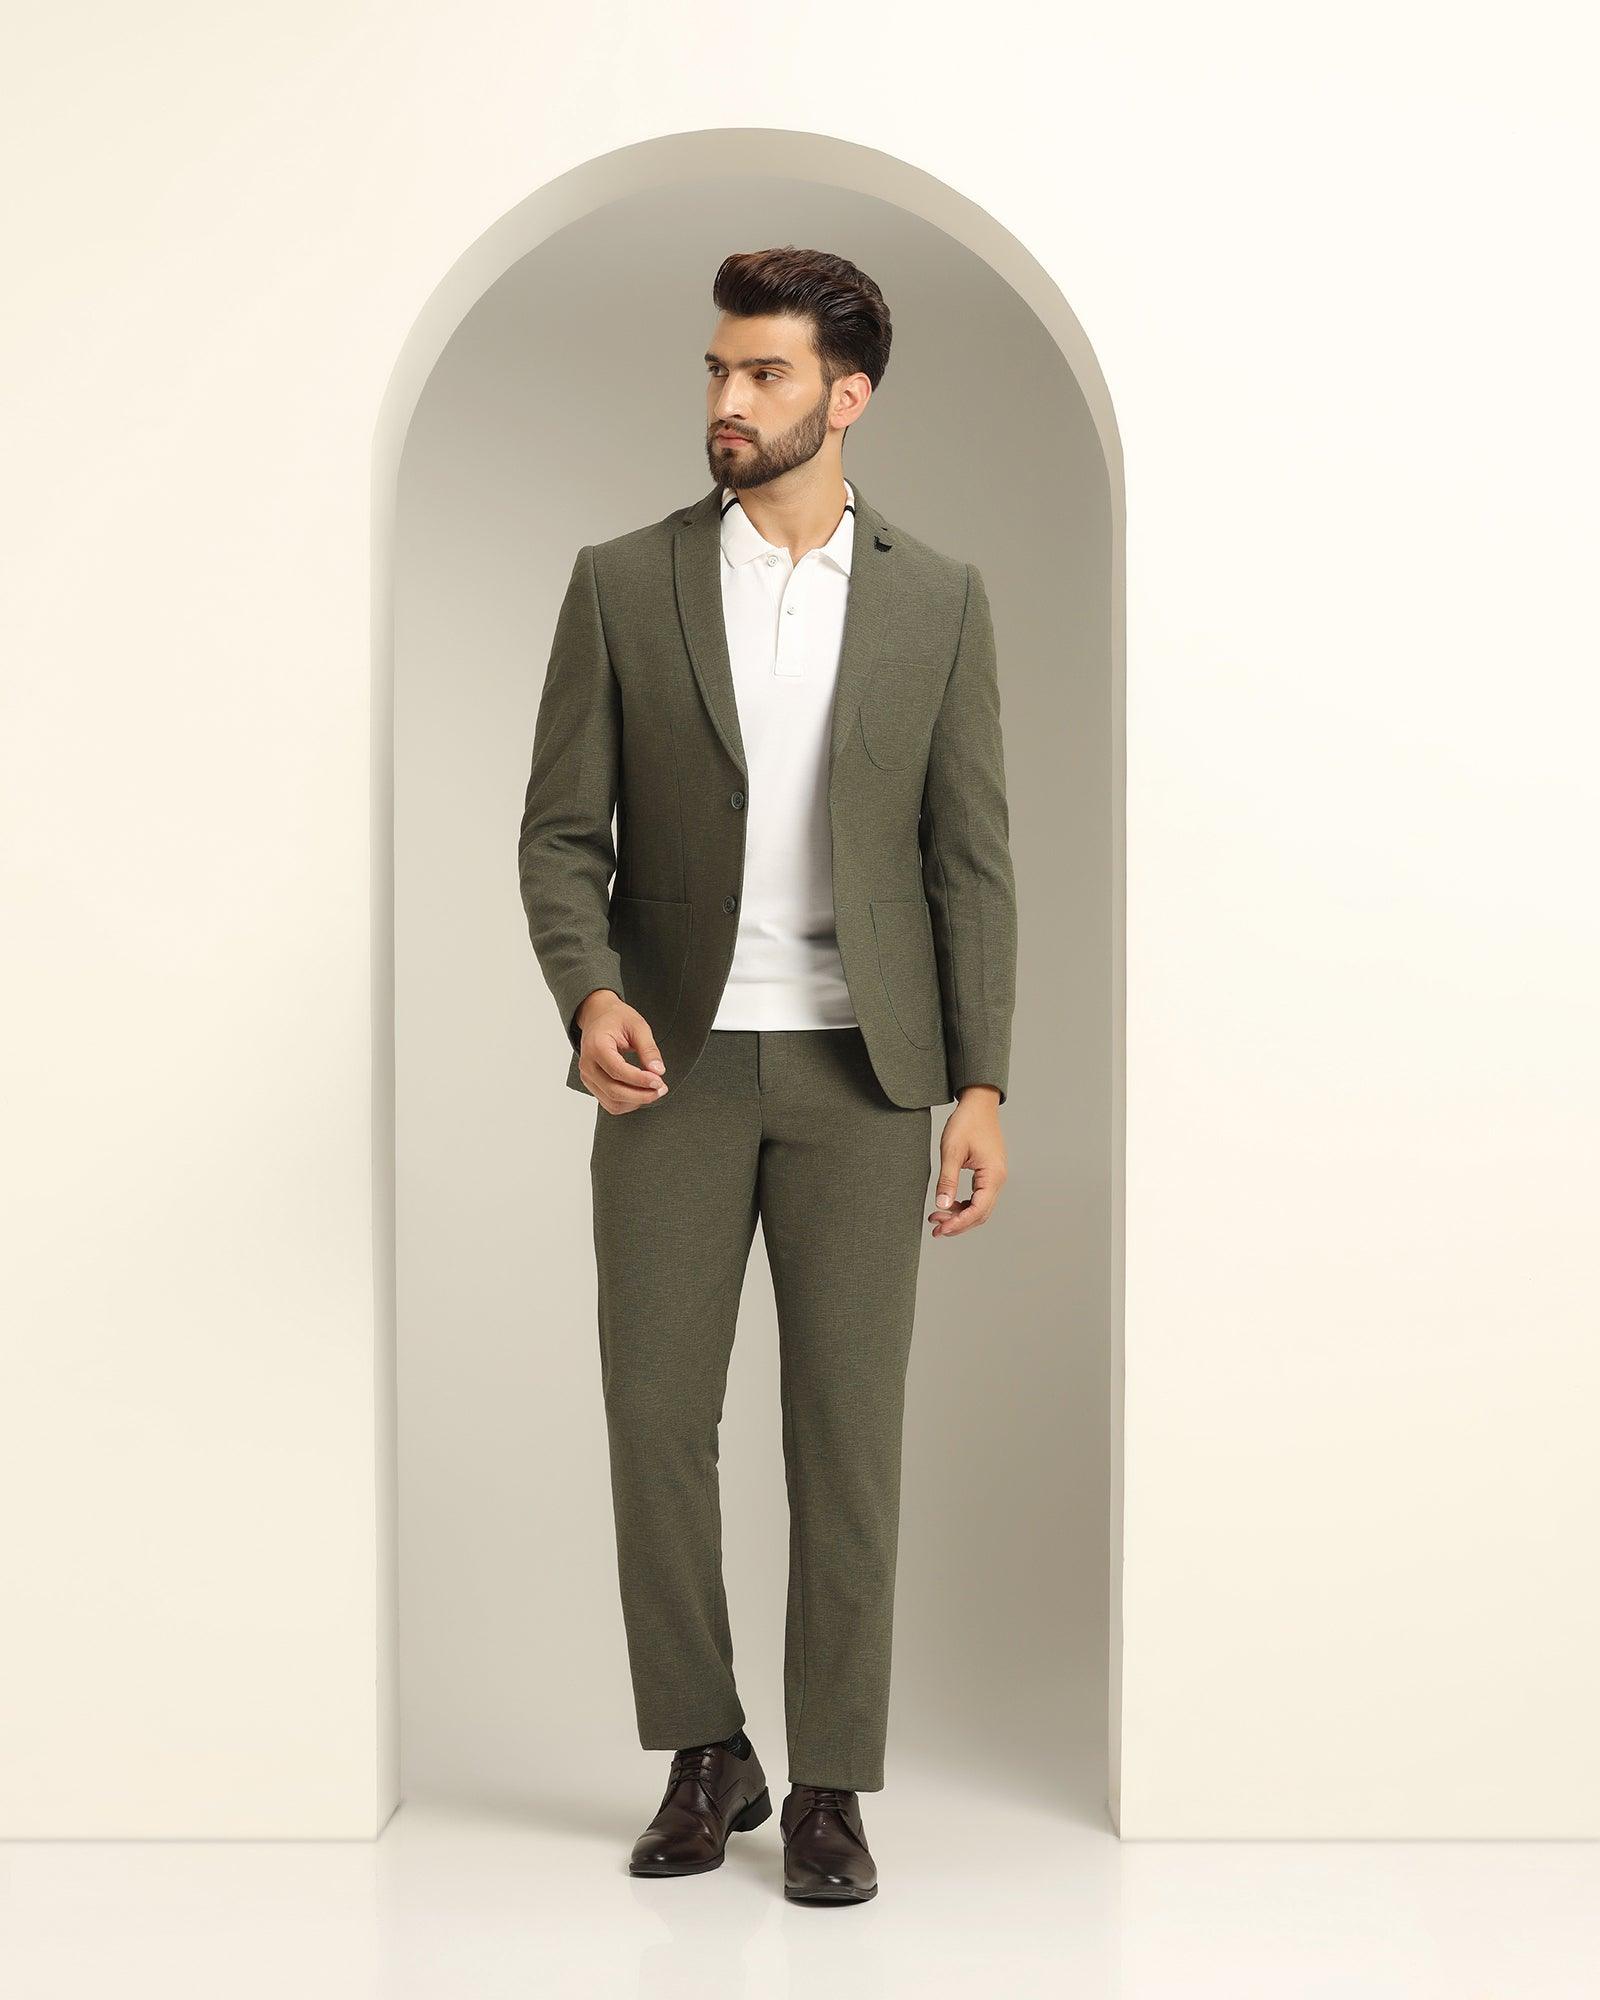 Shop For Emerald Green 3 Piece Suit For Men At Sainly– SAINLY